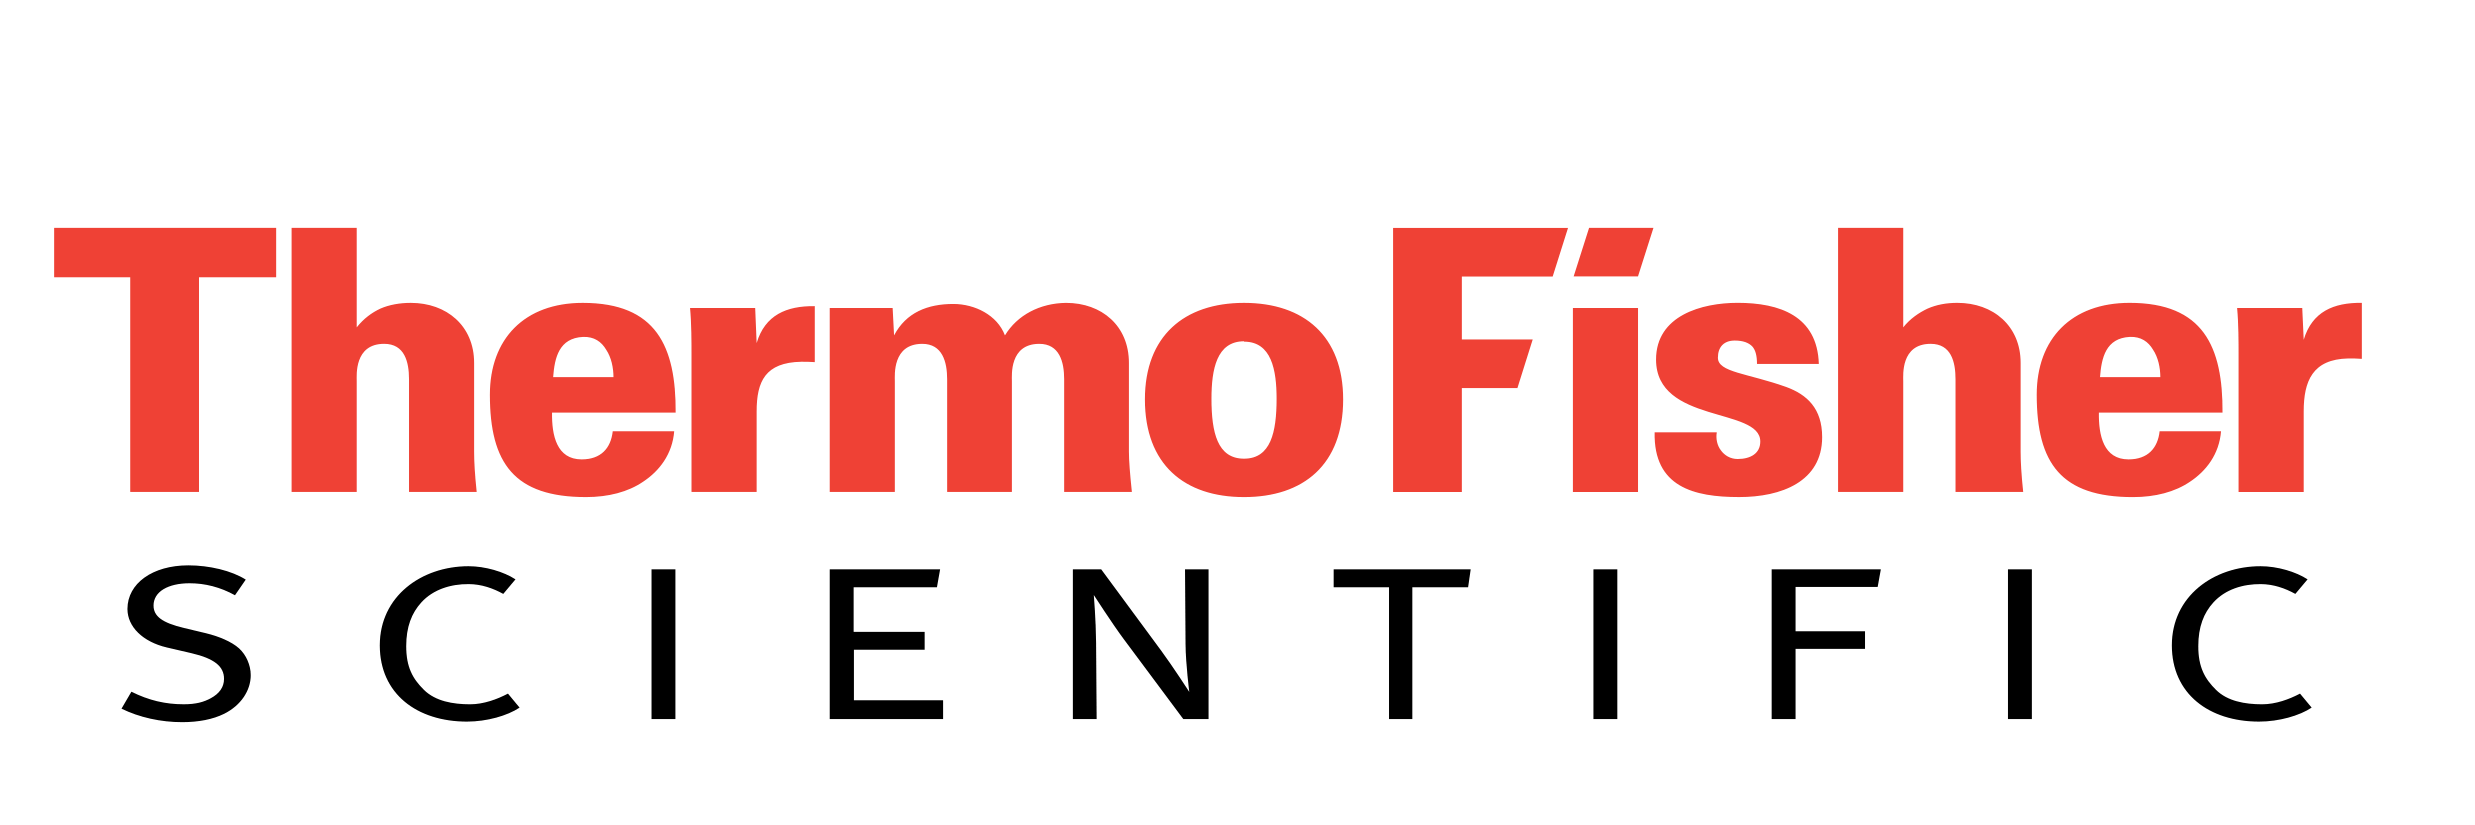 ThermoFisher Scientific  Expertise Partner